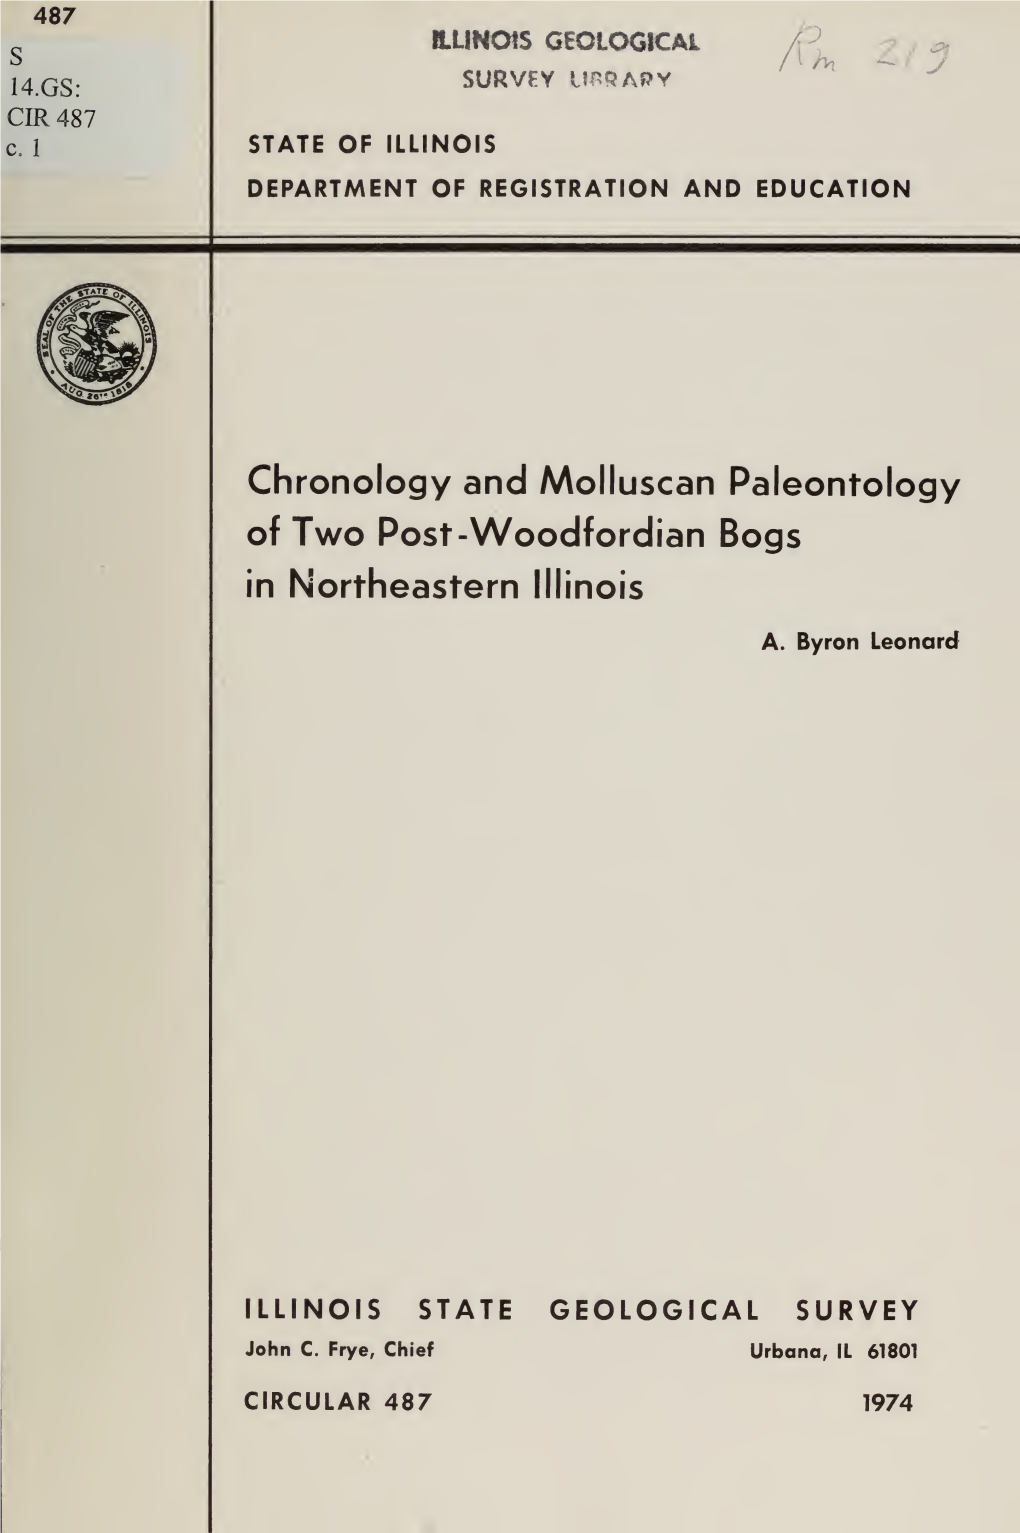 Chronology and Molluscan Paleontology of Two Post-Woodfordian Bogs in Northeastern Illinois